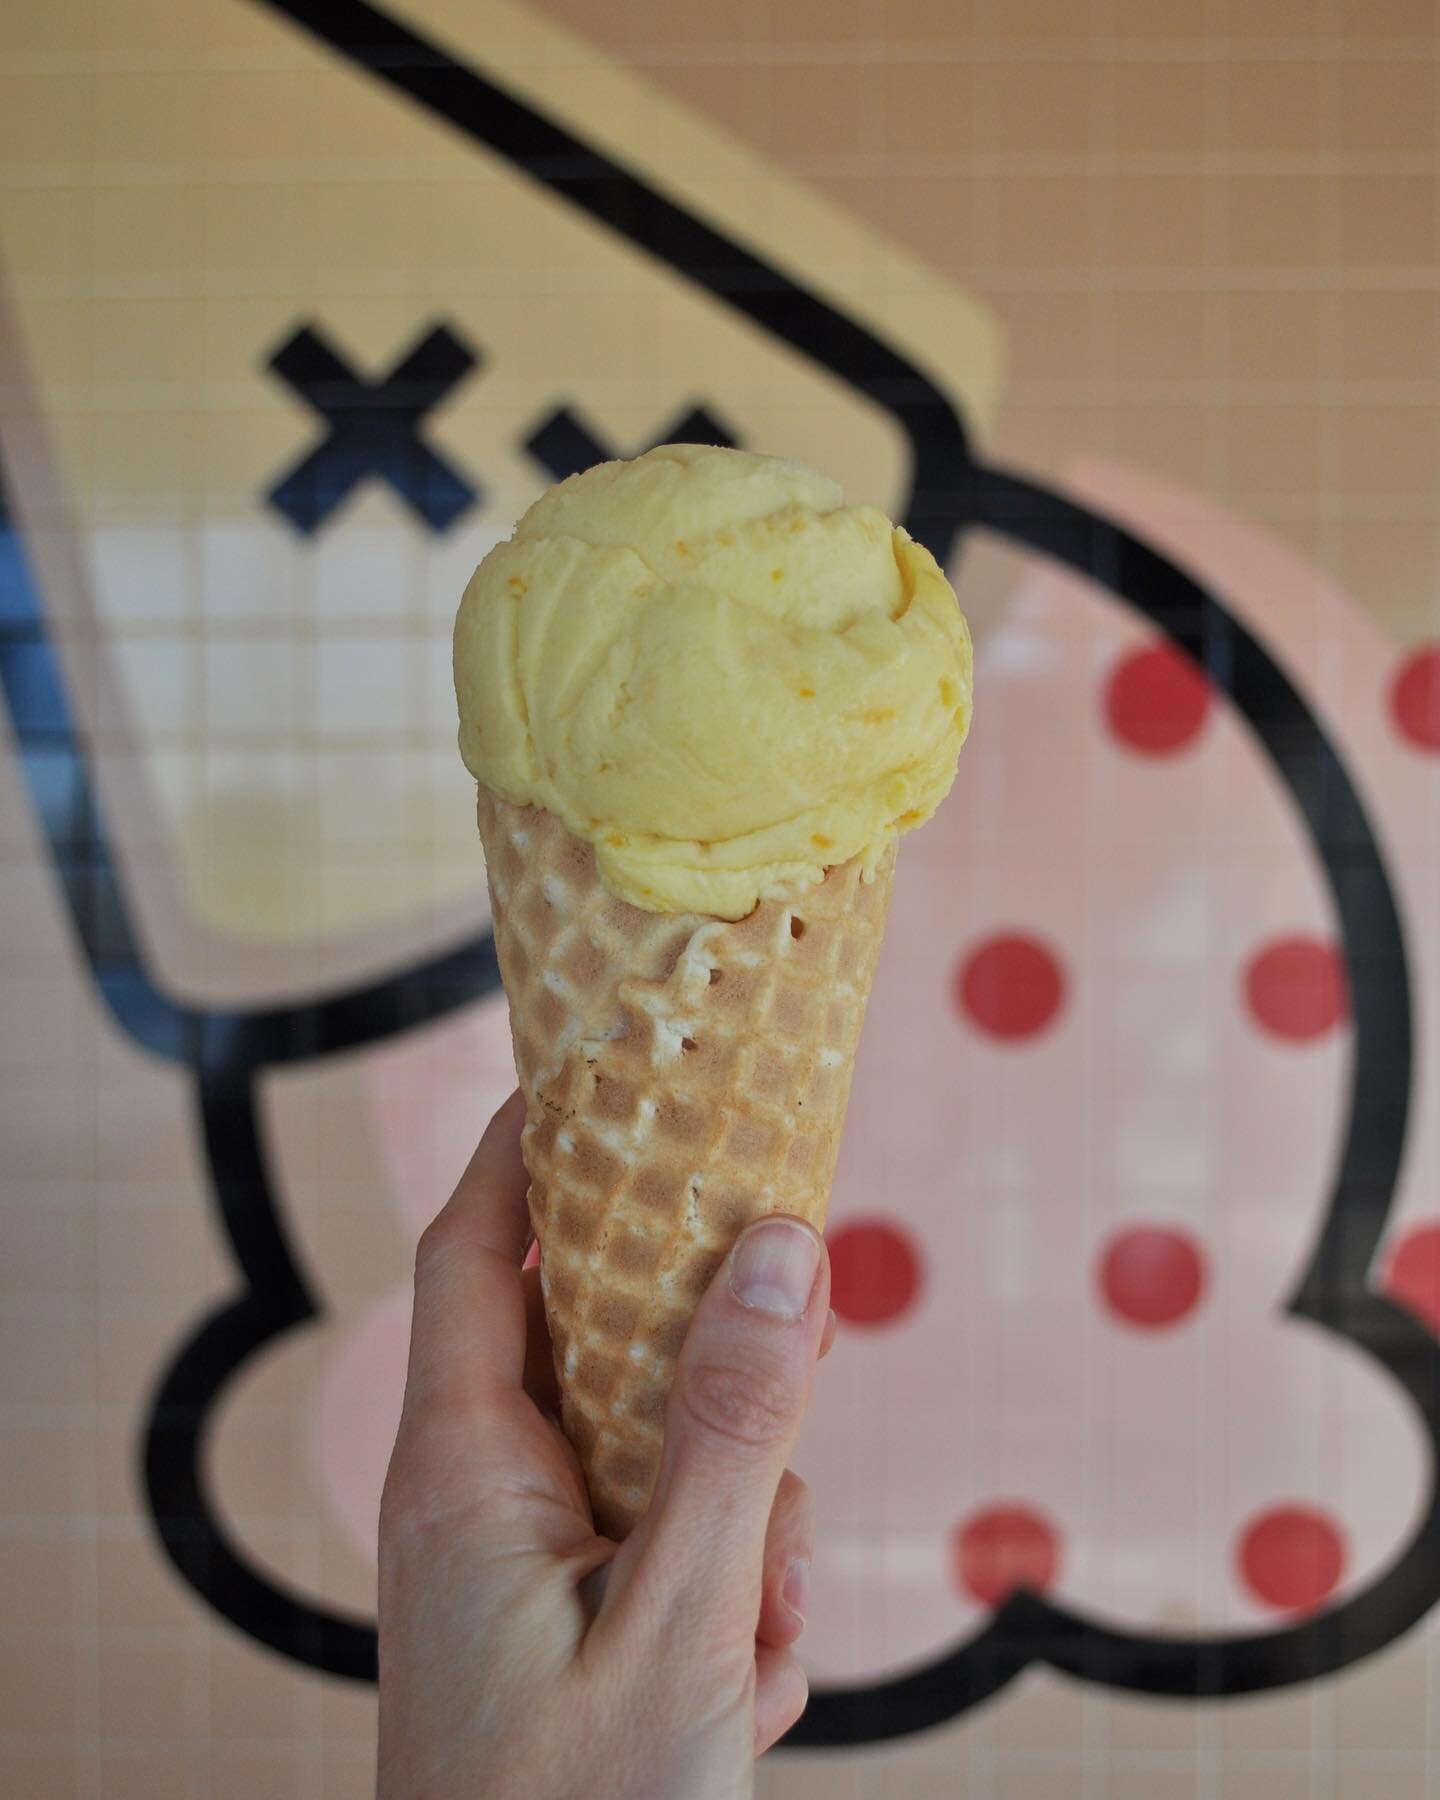 Cheers to all the mamas, a.k.a. sunshines in everyone&rsquo;s else lives. Our family wishes you all a wonderful Mother&rsquo;s Day! ☀️💛
.
.
.
#xoicecream #madewithlove #yycmom #yyclove #icecreamlover #becausecalgary #whatsupcalgary